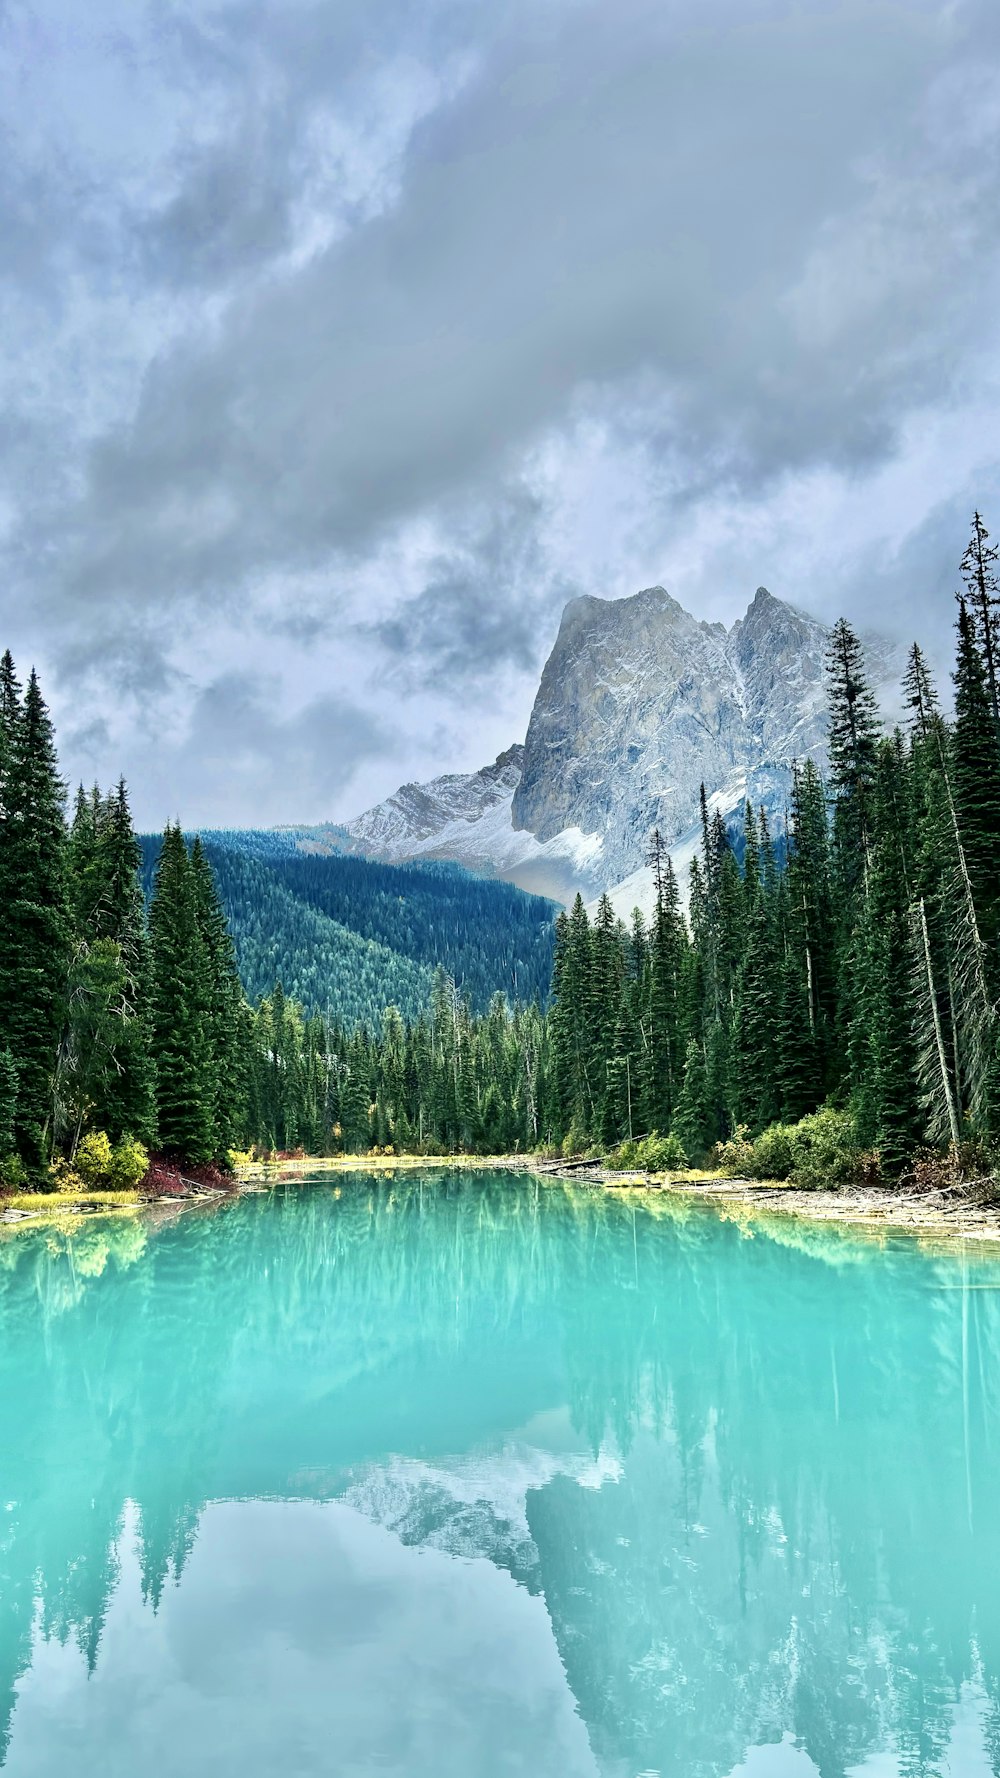 a lake surrounded by trees and mountains under a cloudy sky